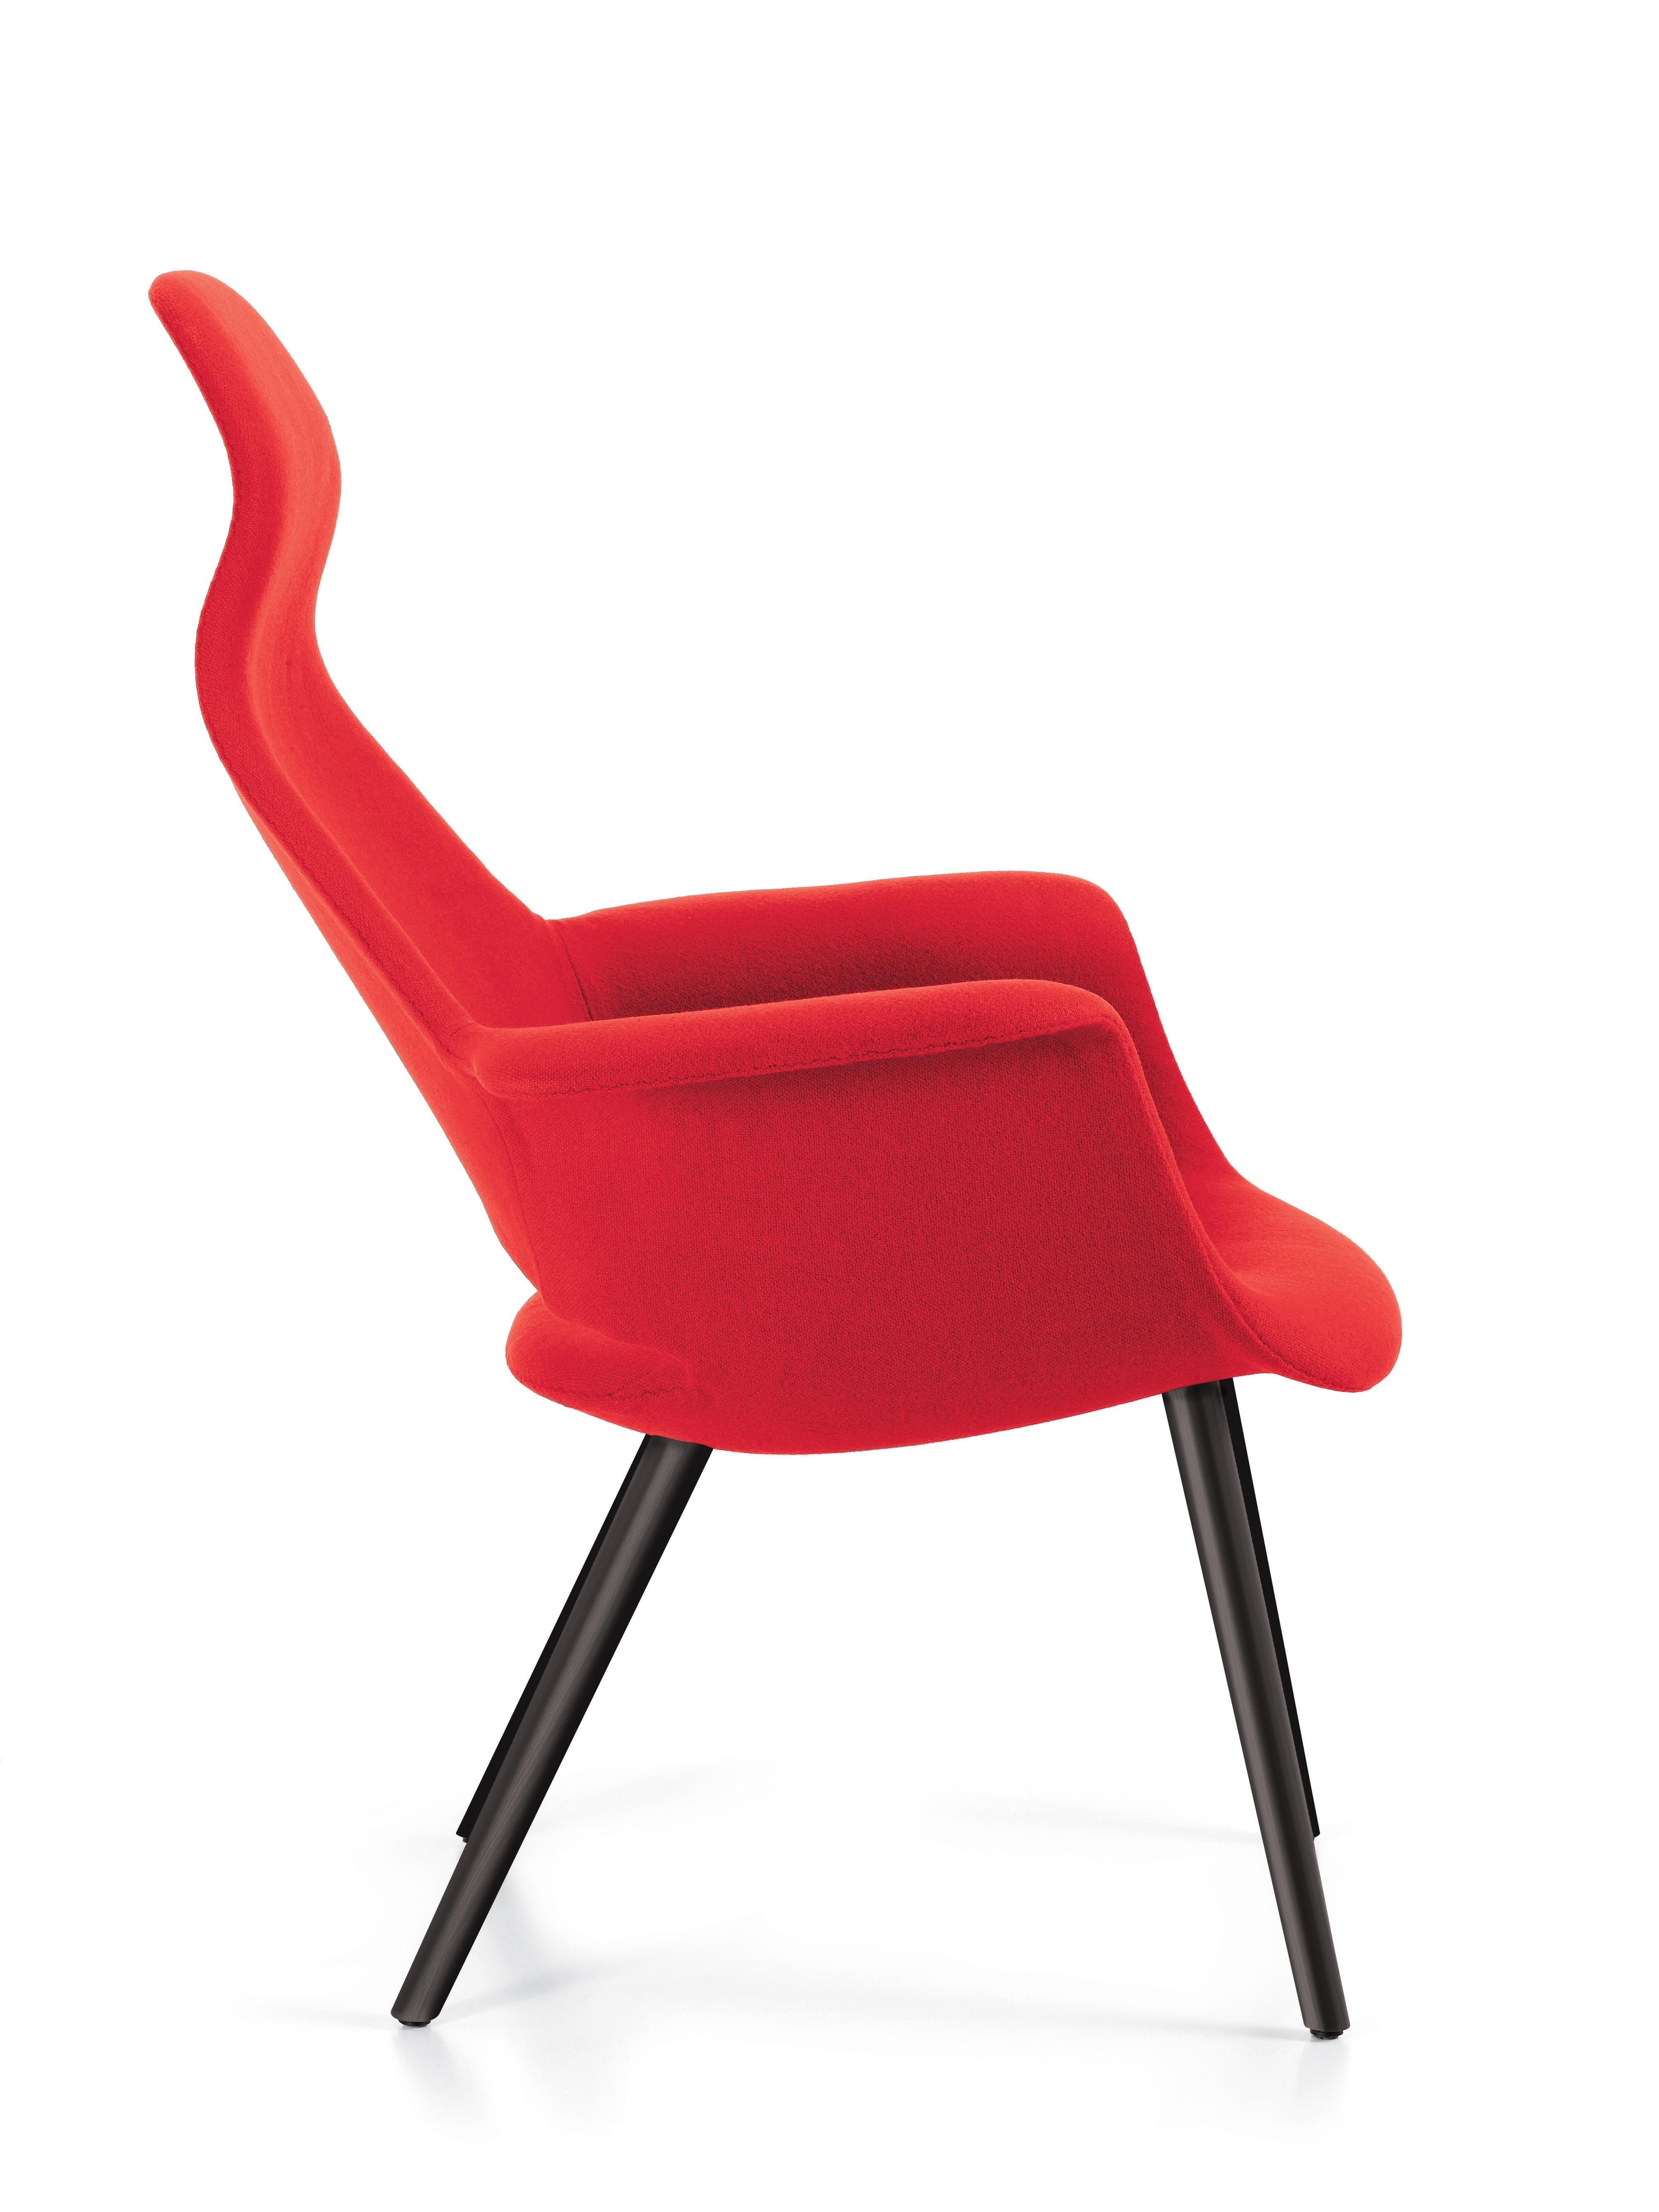 These items are currently only available in the United States.

The Organic chair – a small and comfortable reading chair – was developed in several versions for the 1940 ‘Organic Design in Home Furnishings’ competition organized by the Museum of